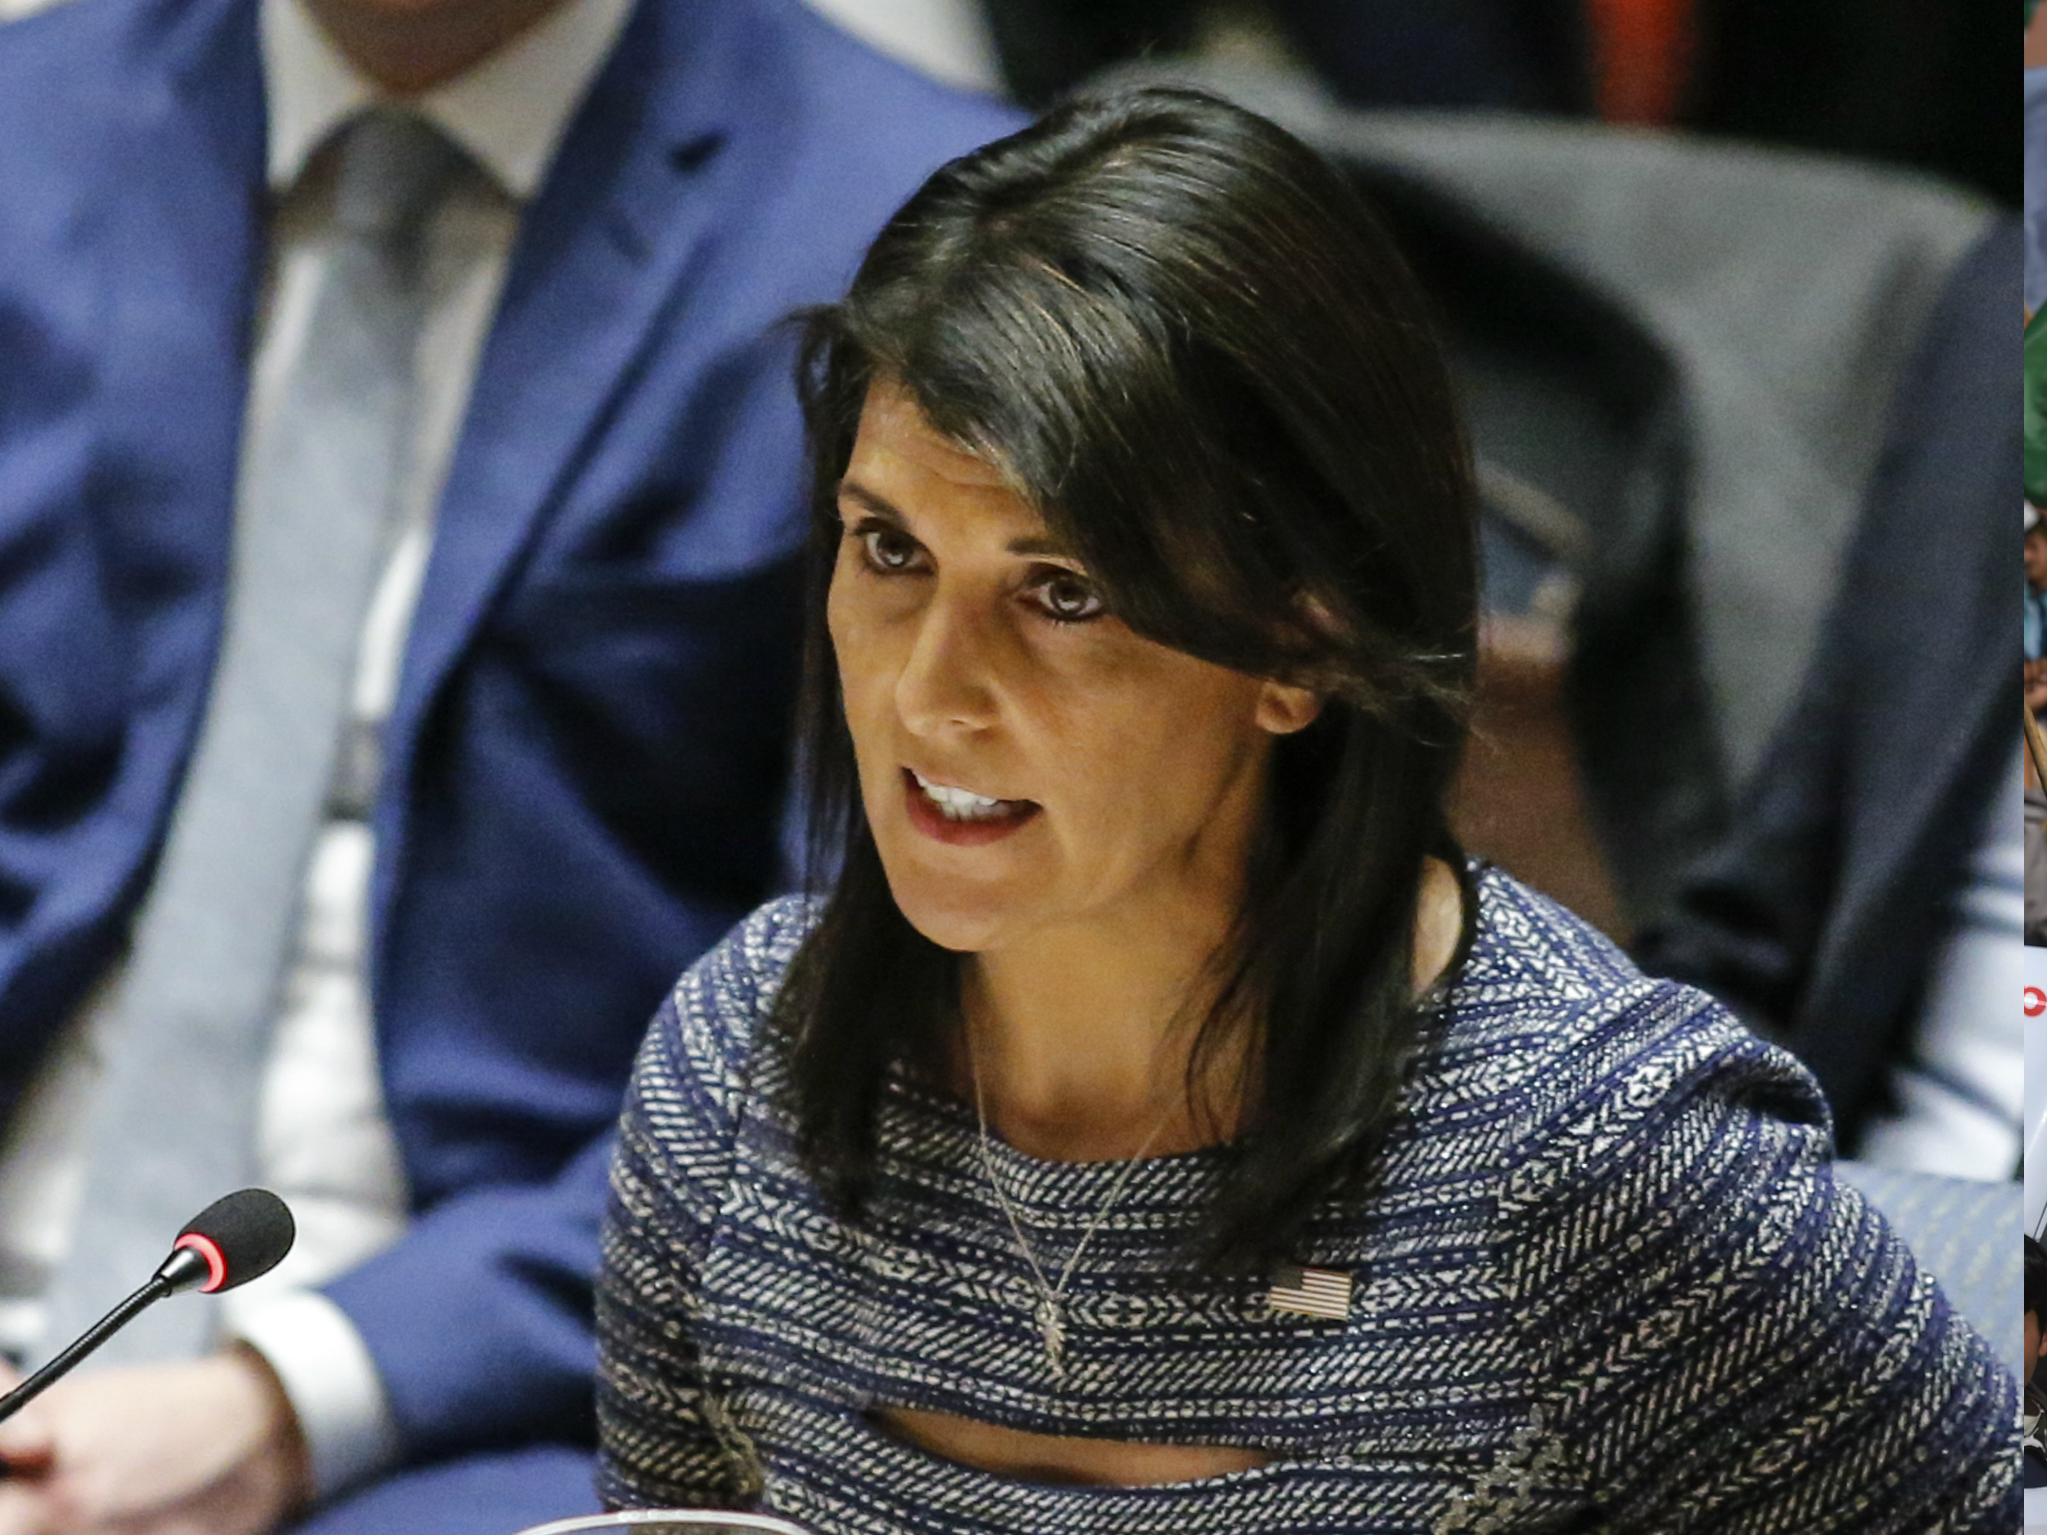 US Ambassador to the UN Nikki Haley speaks during a Security Council meeting on 22 December 2017